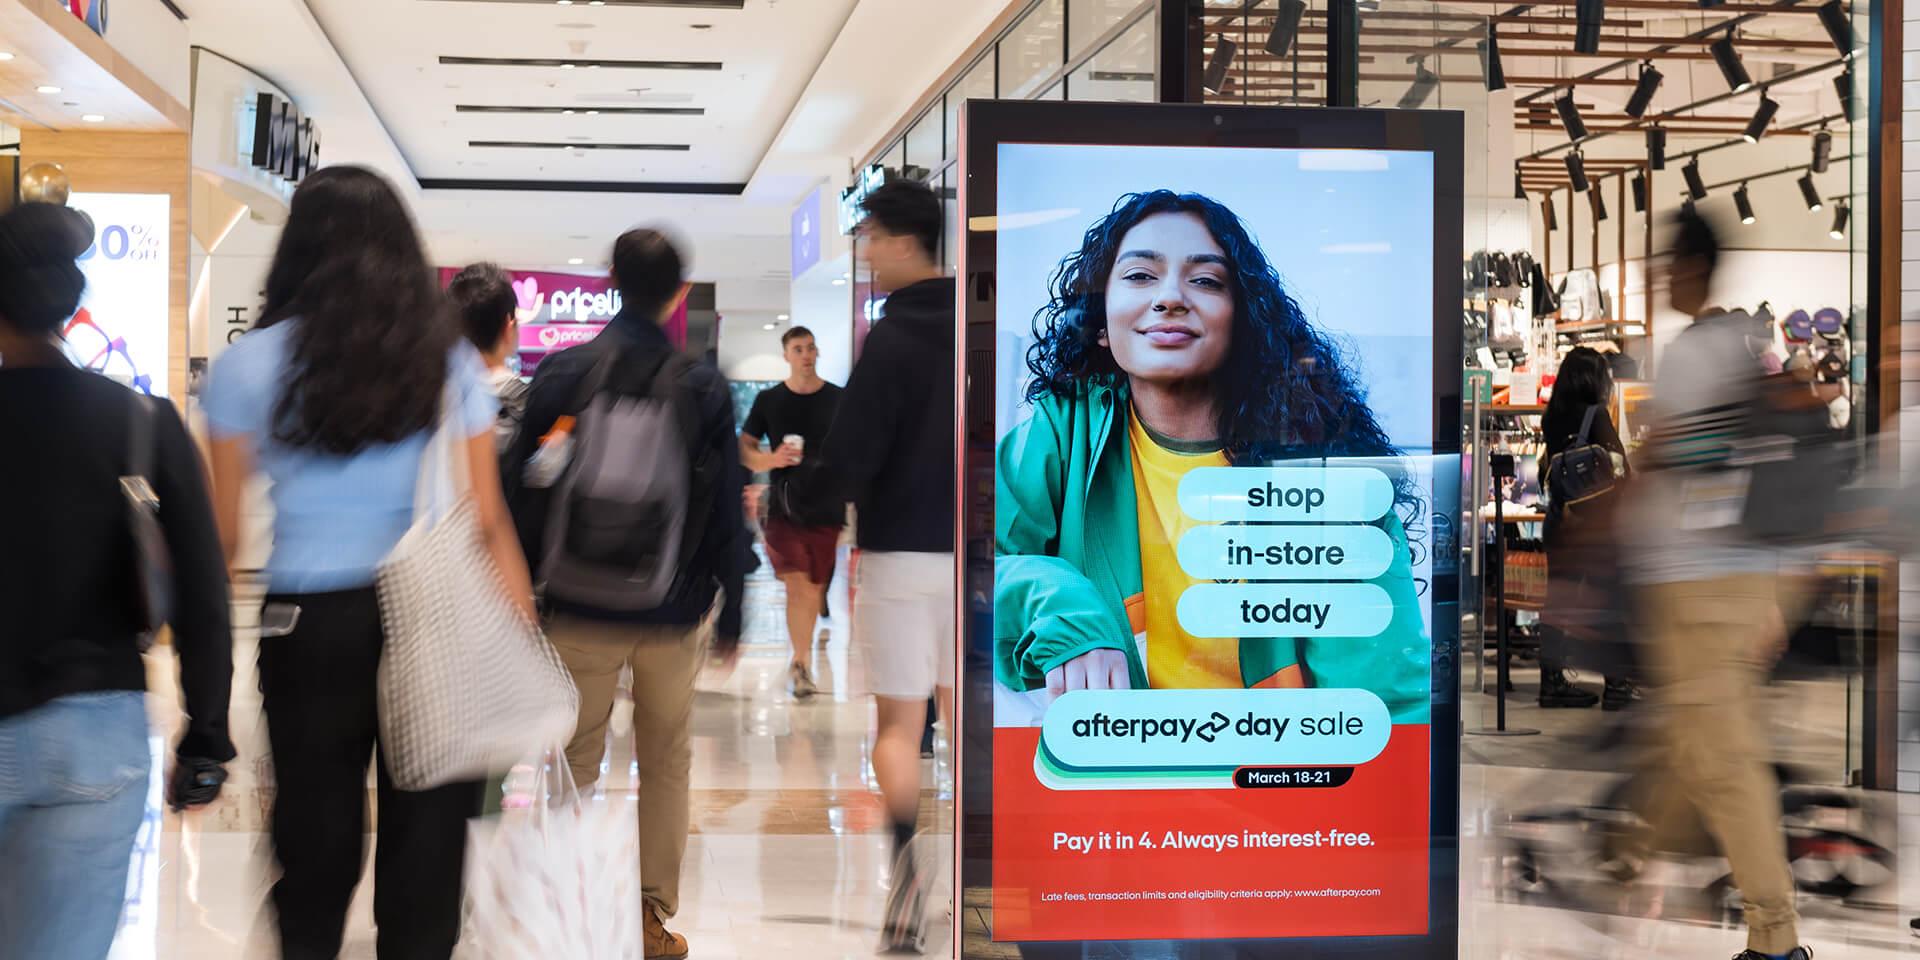 DOOH advertisement with Scentre Group in a shopping mall